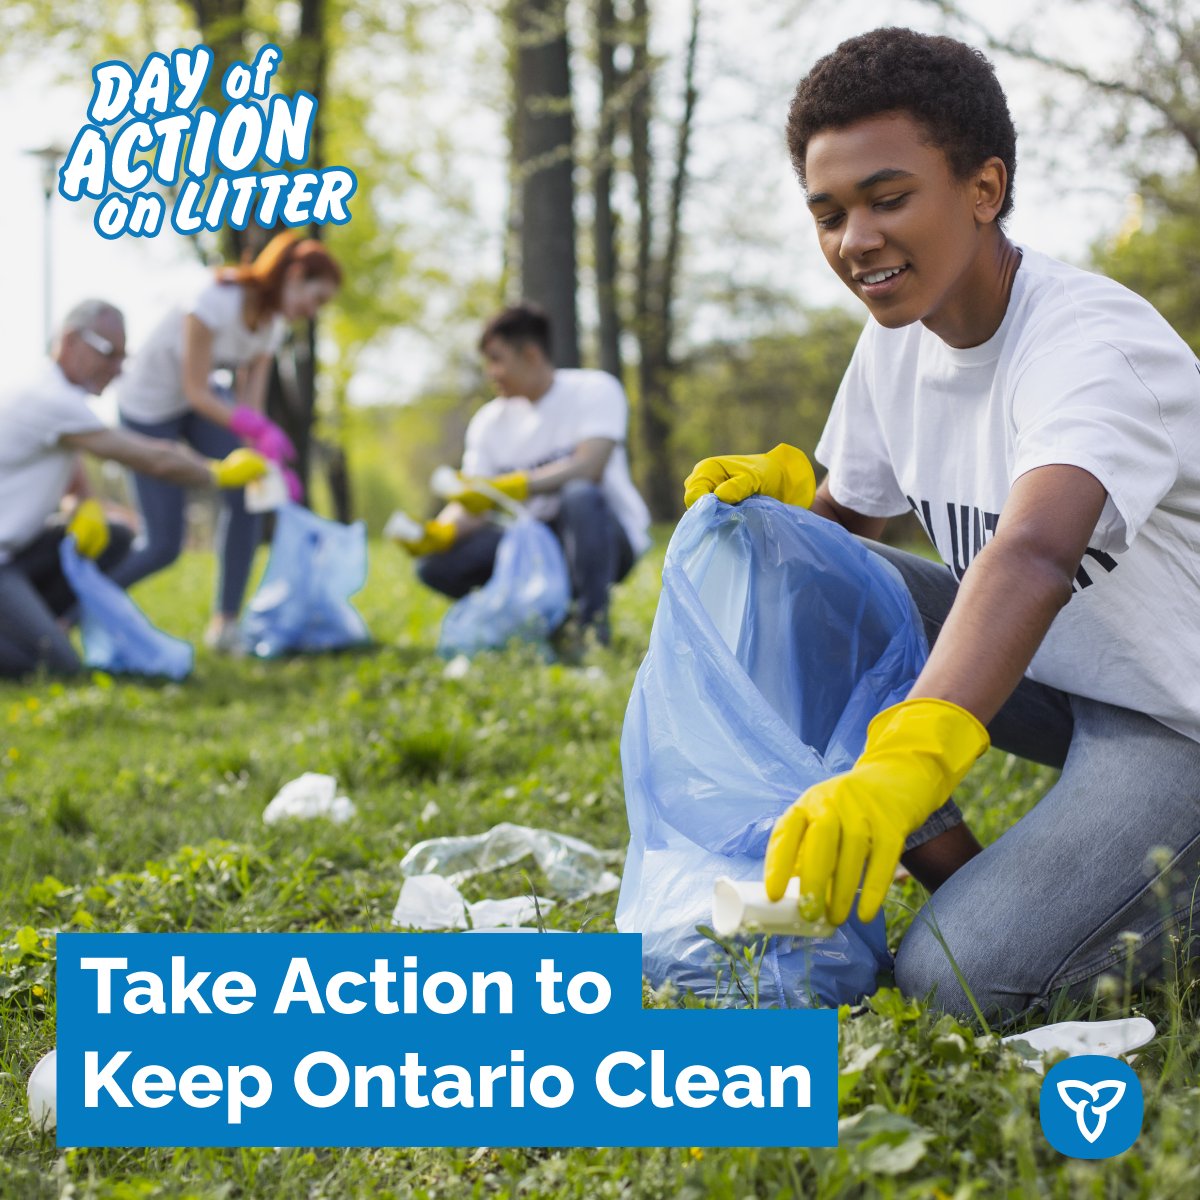 Next Tuesday is our fifth annual Provincial Day of Action on Litter. We are encouraging you to organize your own local litter cleanup with your municipality or community group and use the hashtag #actONlitter to get it trending on social media.
@Andrea_Khanjin